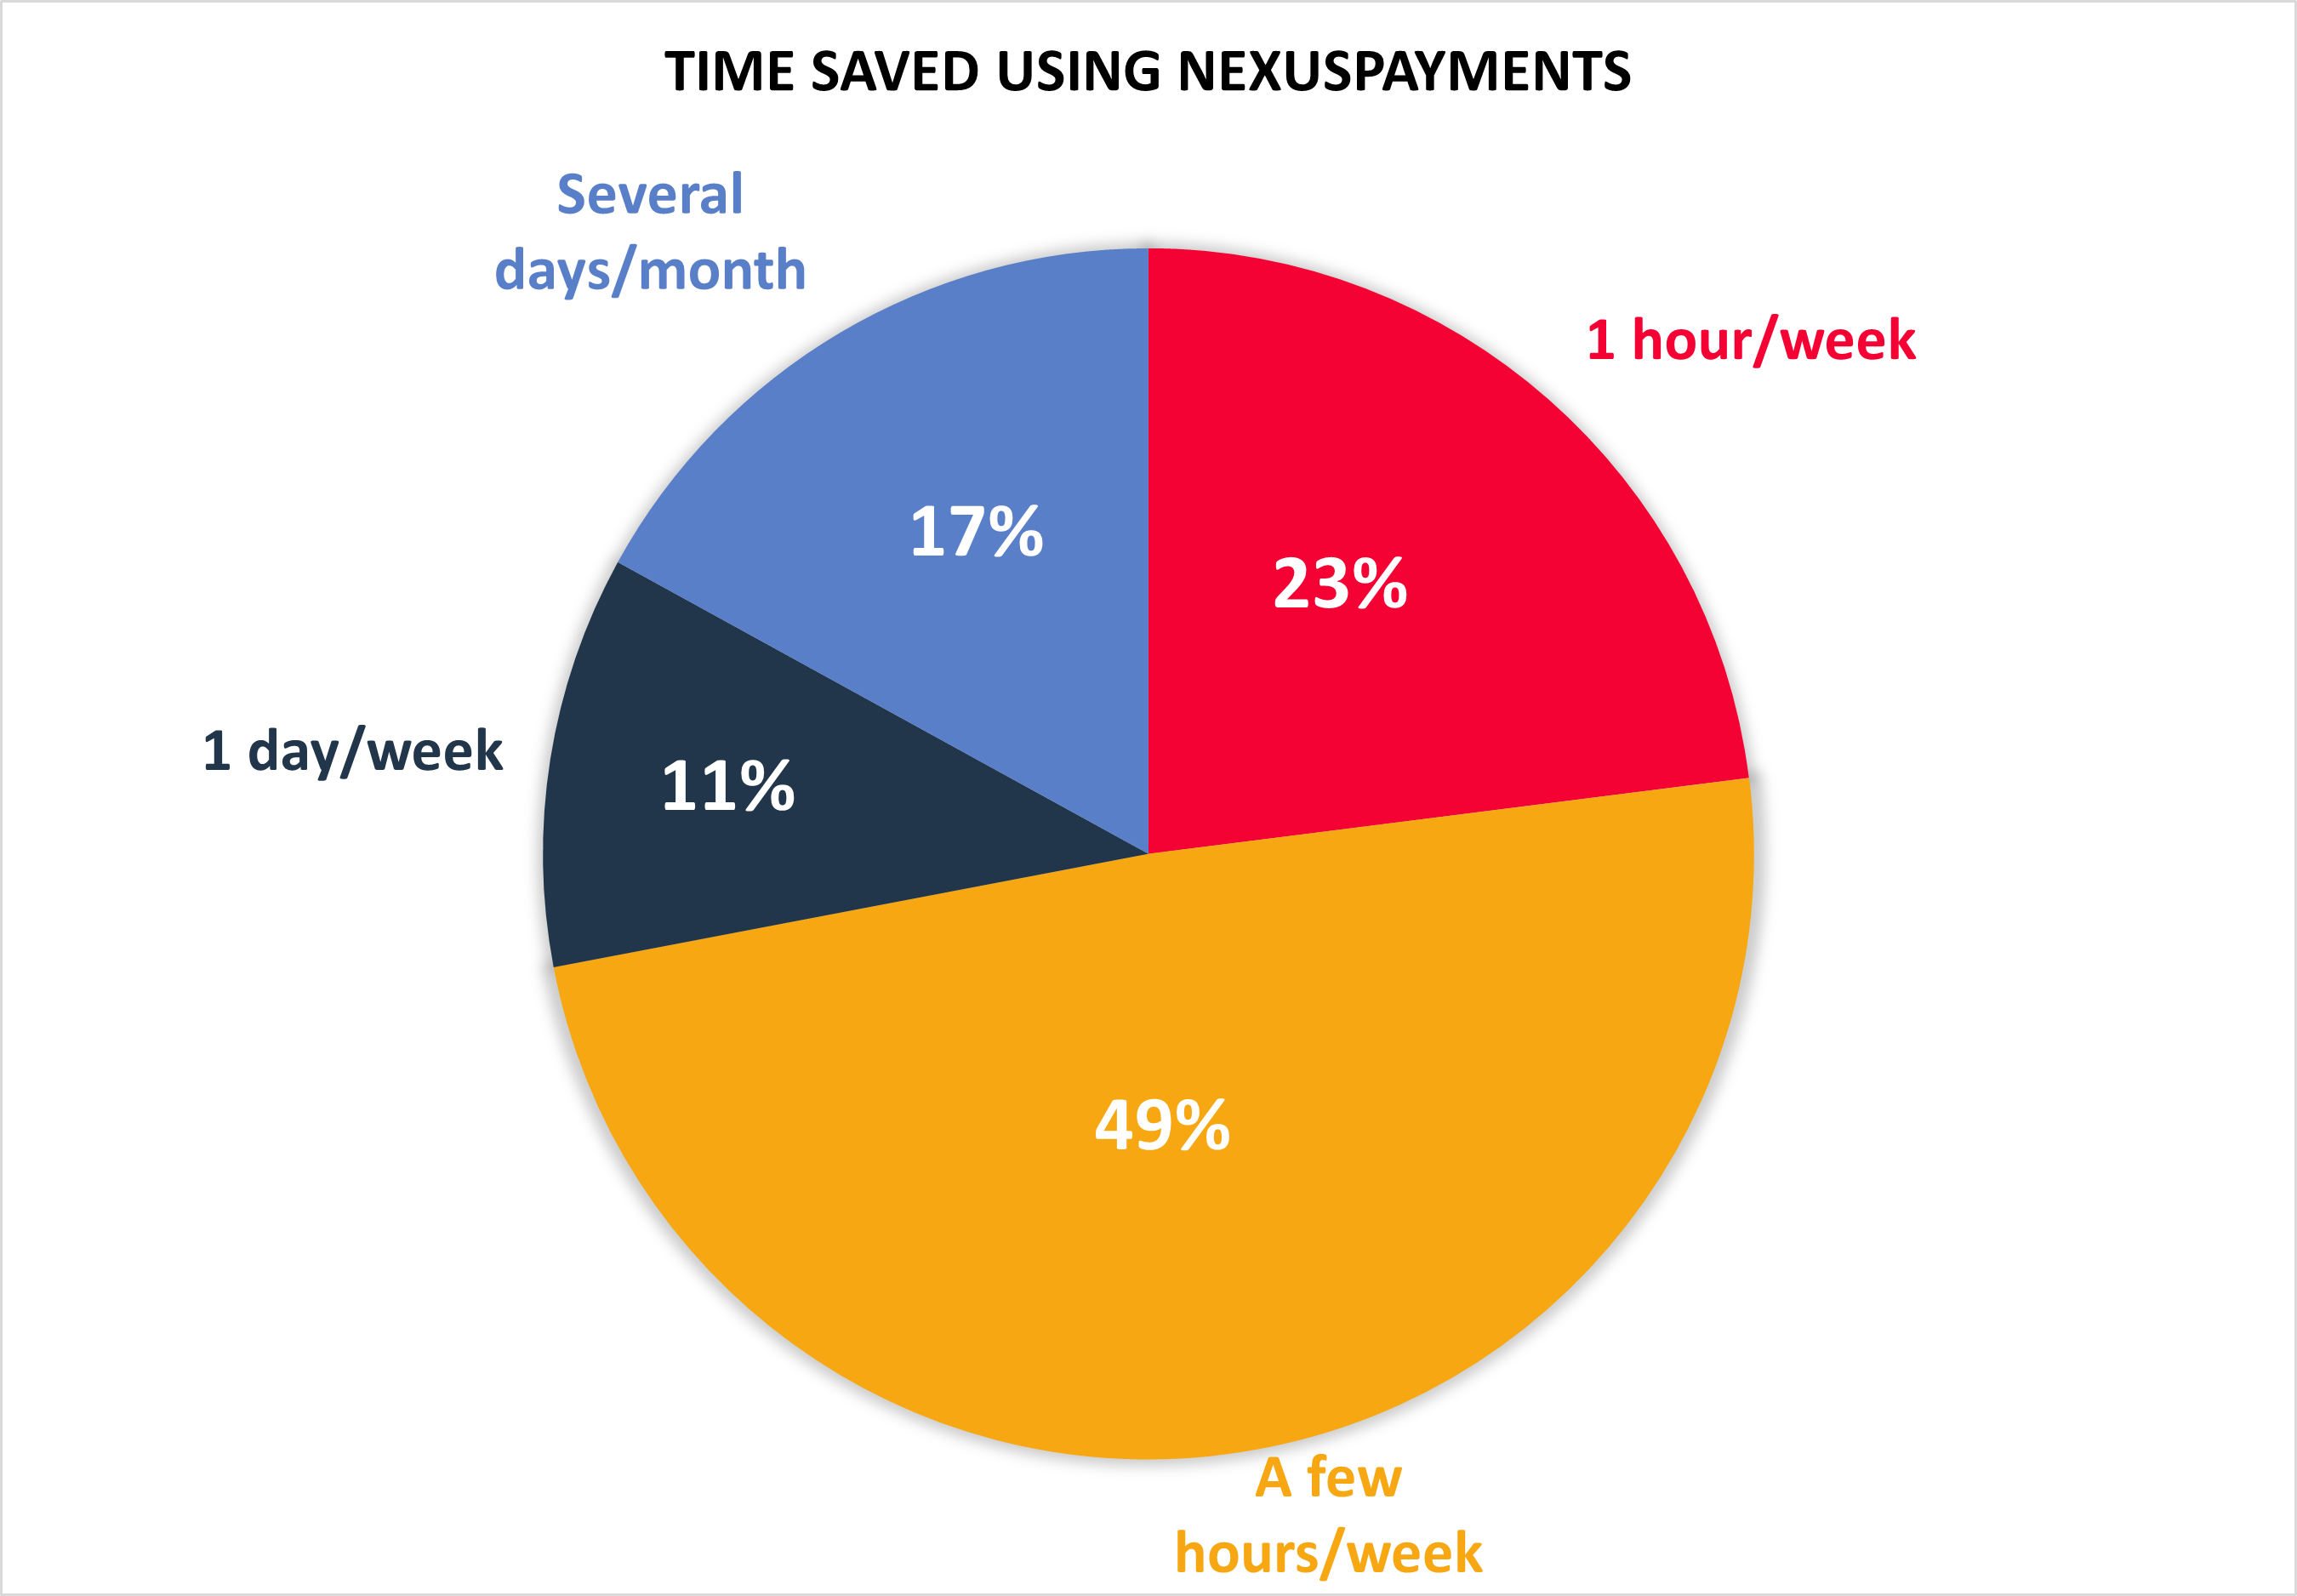 77% of NexusPayments users say they save a few hours/week or more by issuing payments electronically